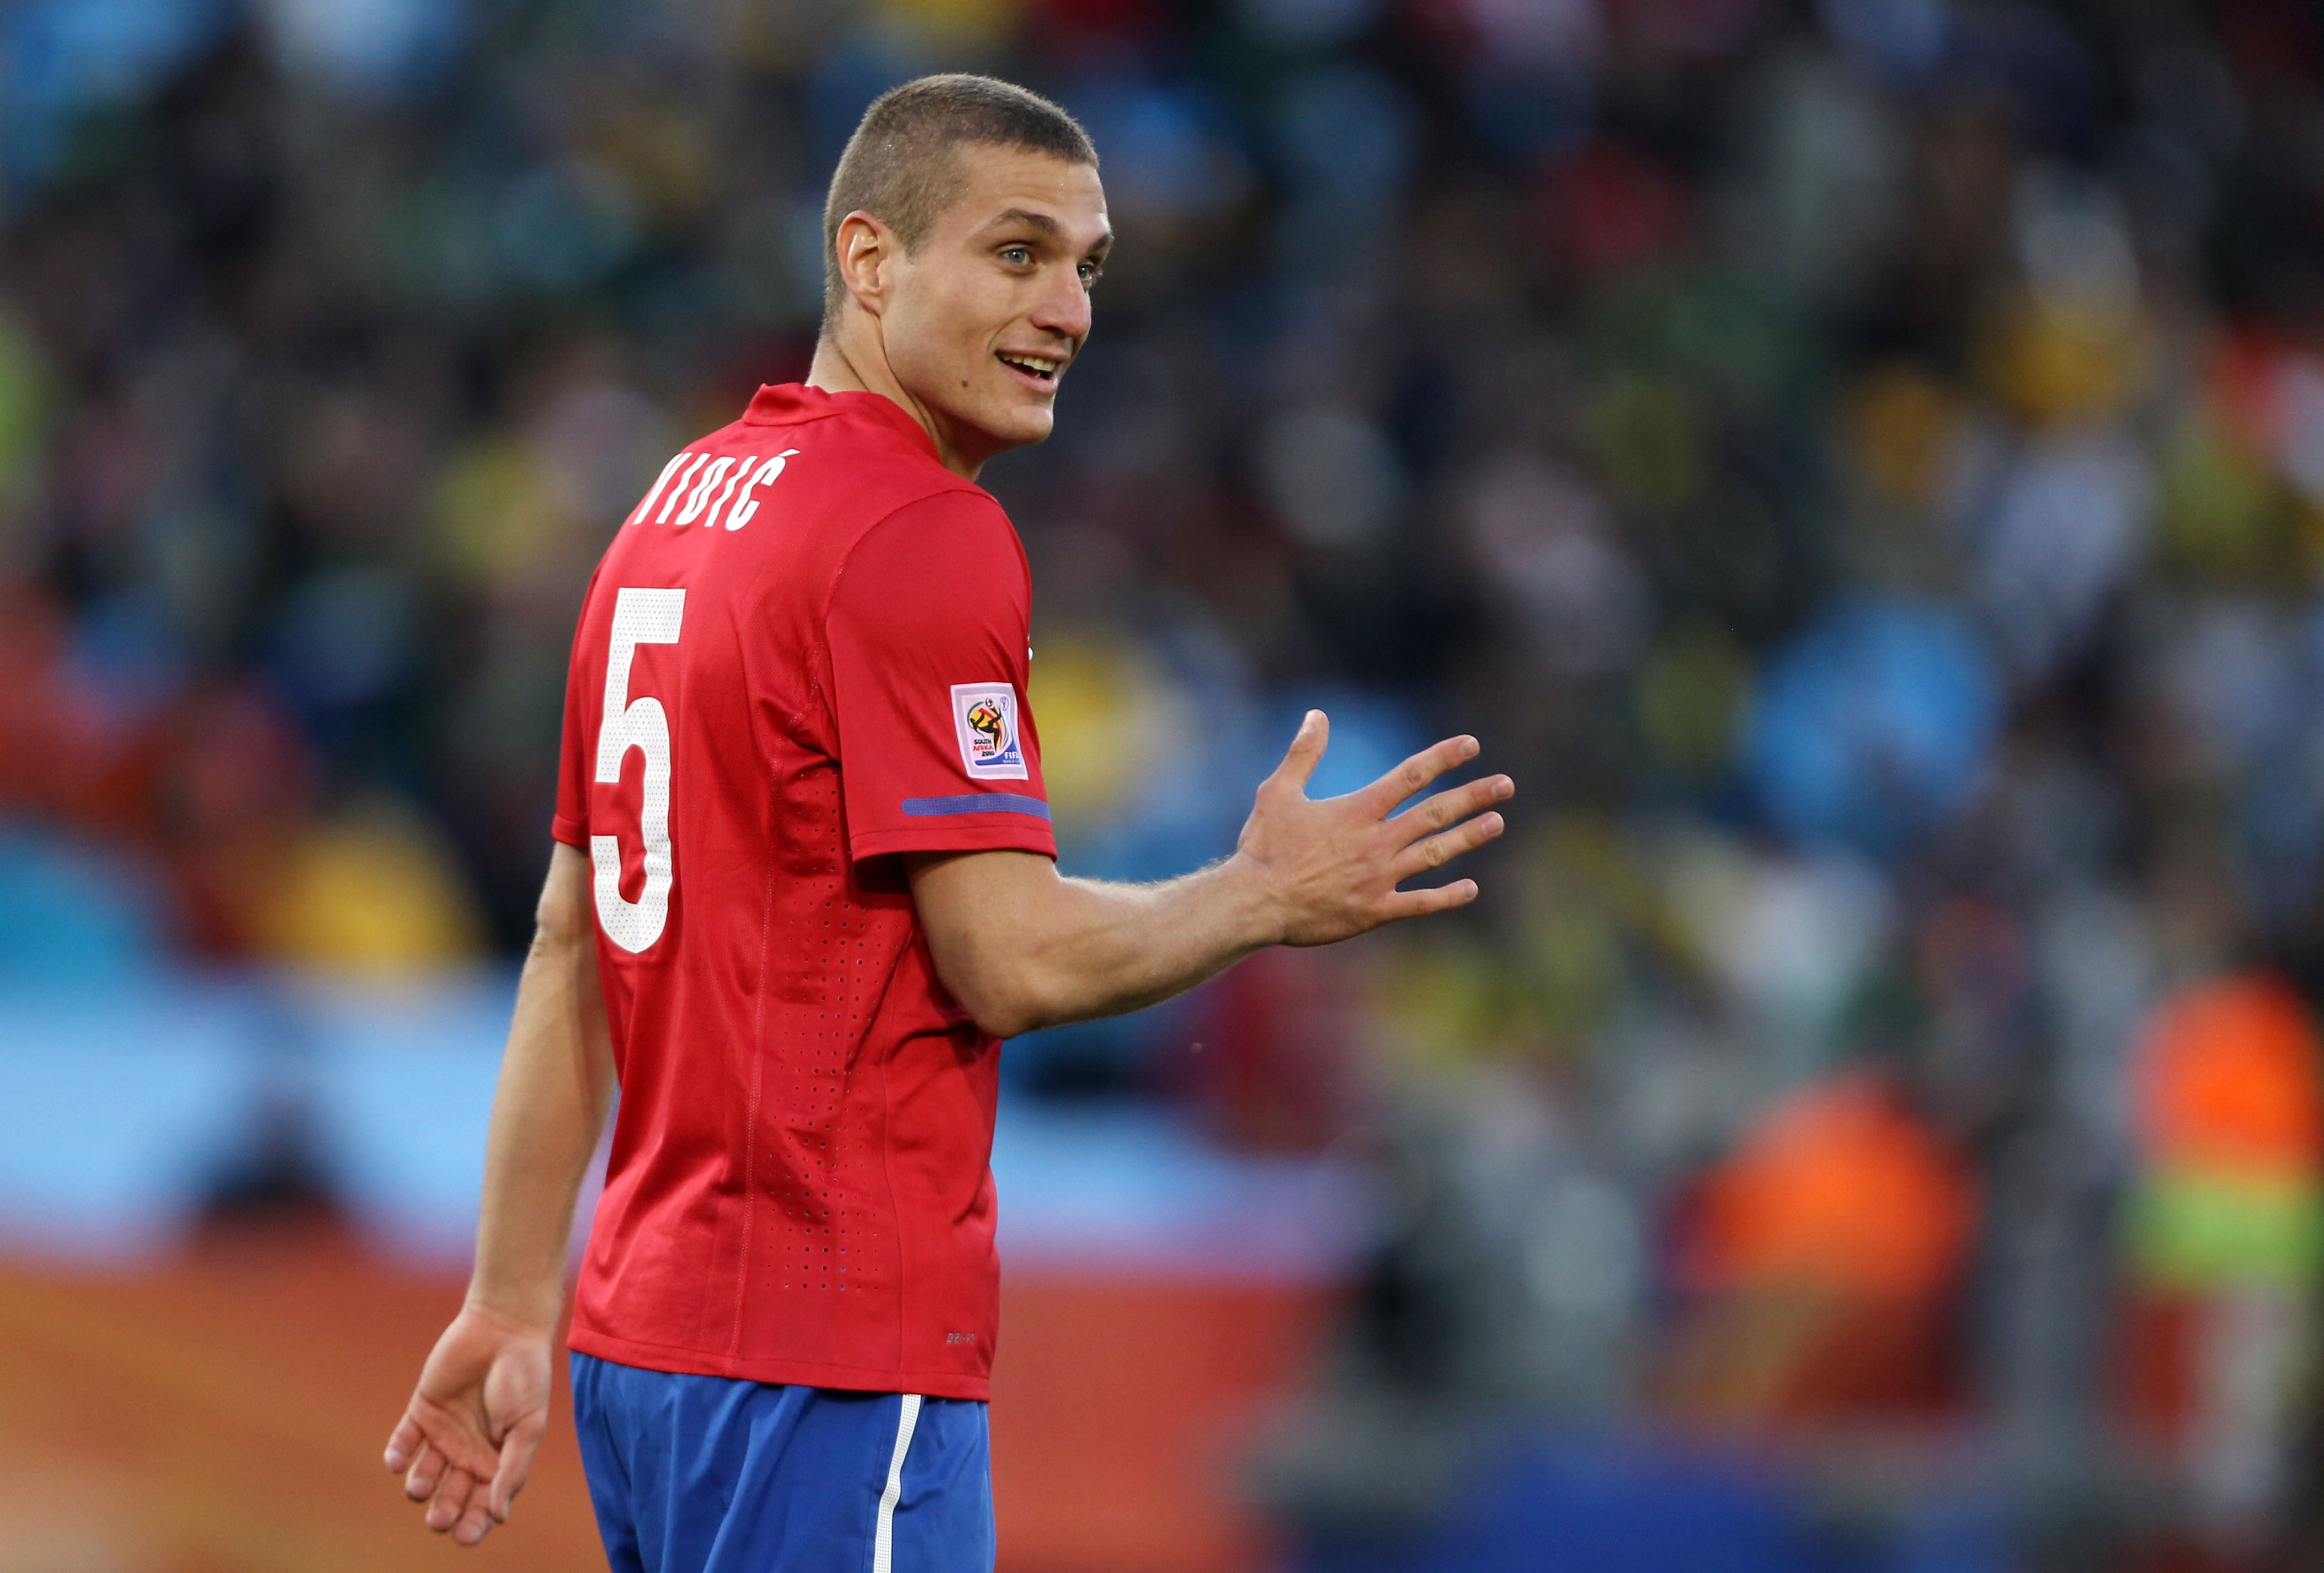 Nemanja Vidic in action for Serbia against Ghana at the 2010 World Cup.